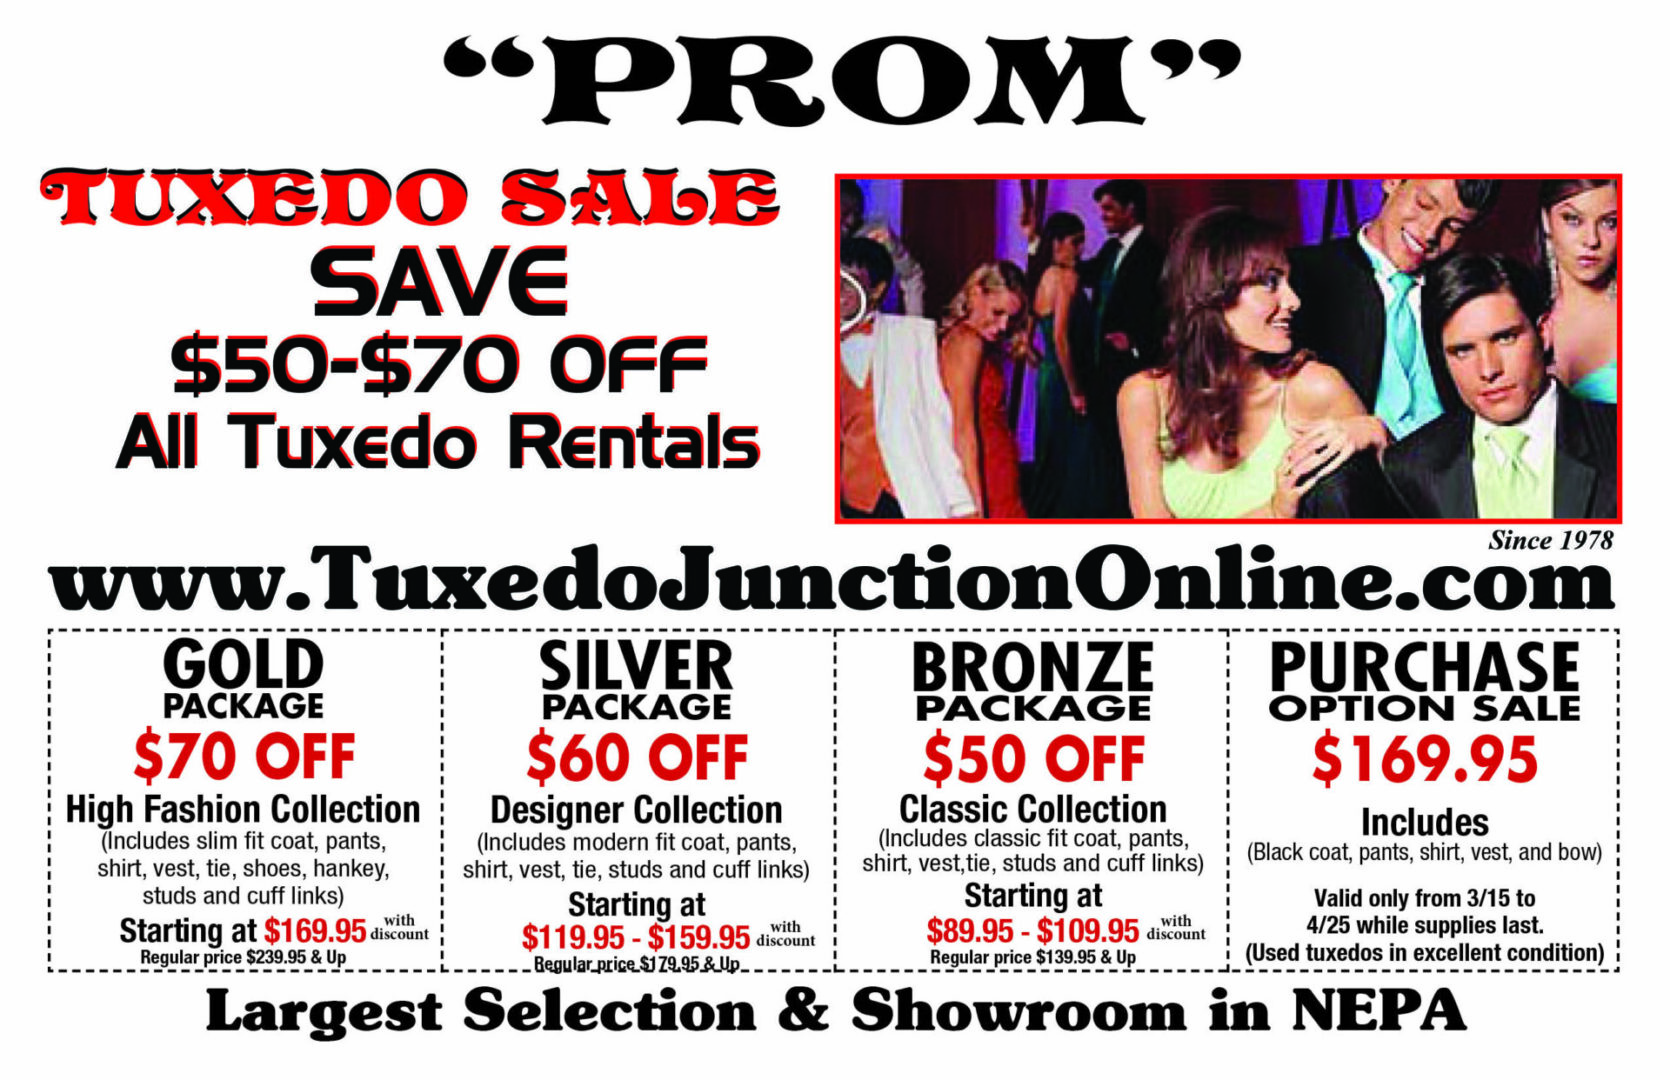 A flyer for tuxedo junction 's prom sale.